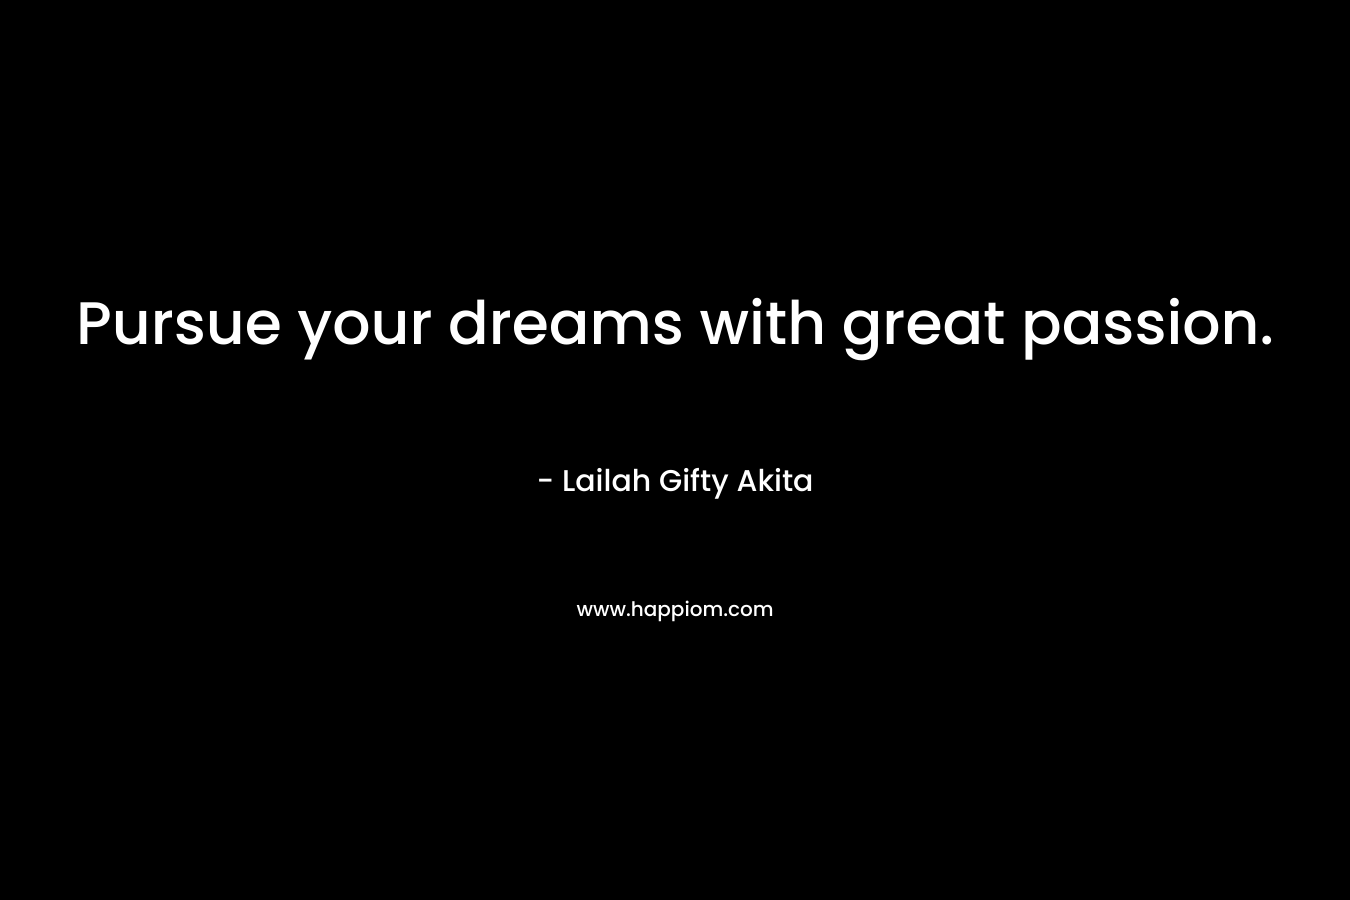 Pursue your dreams with great passion.